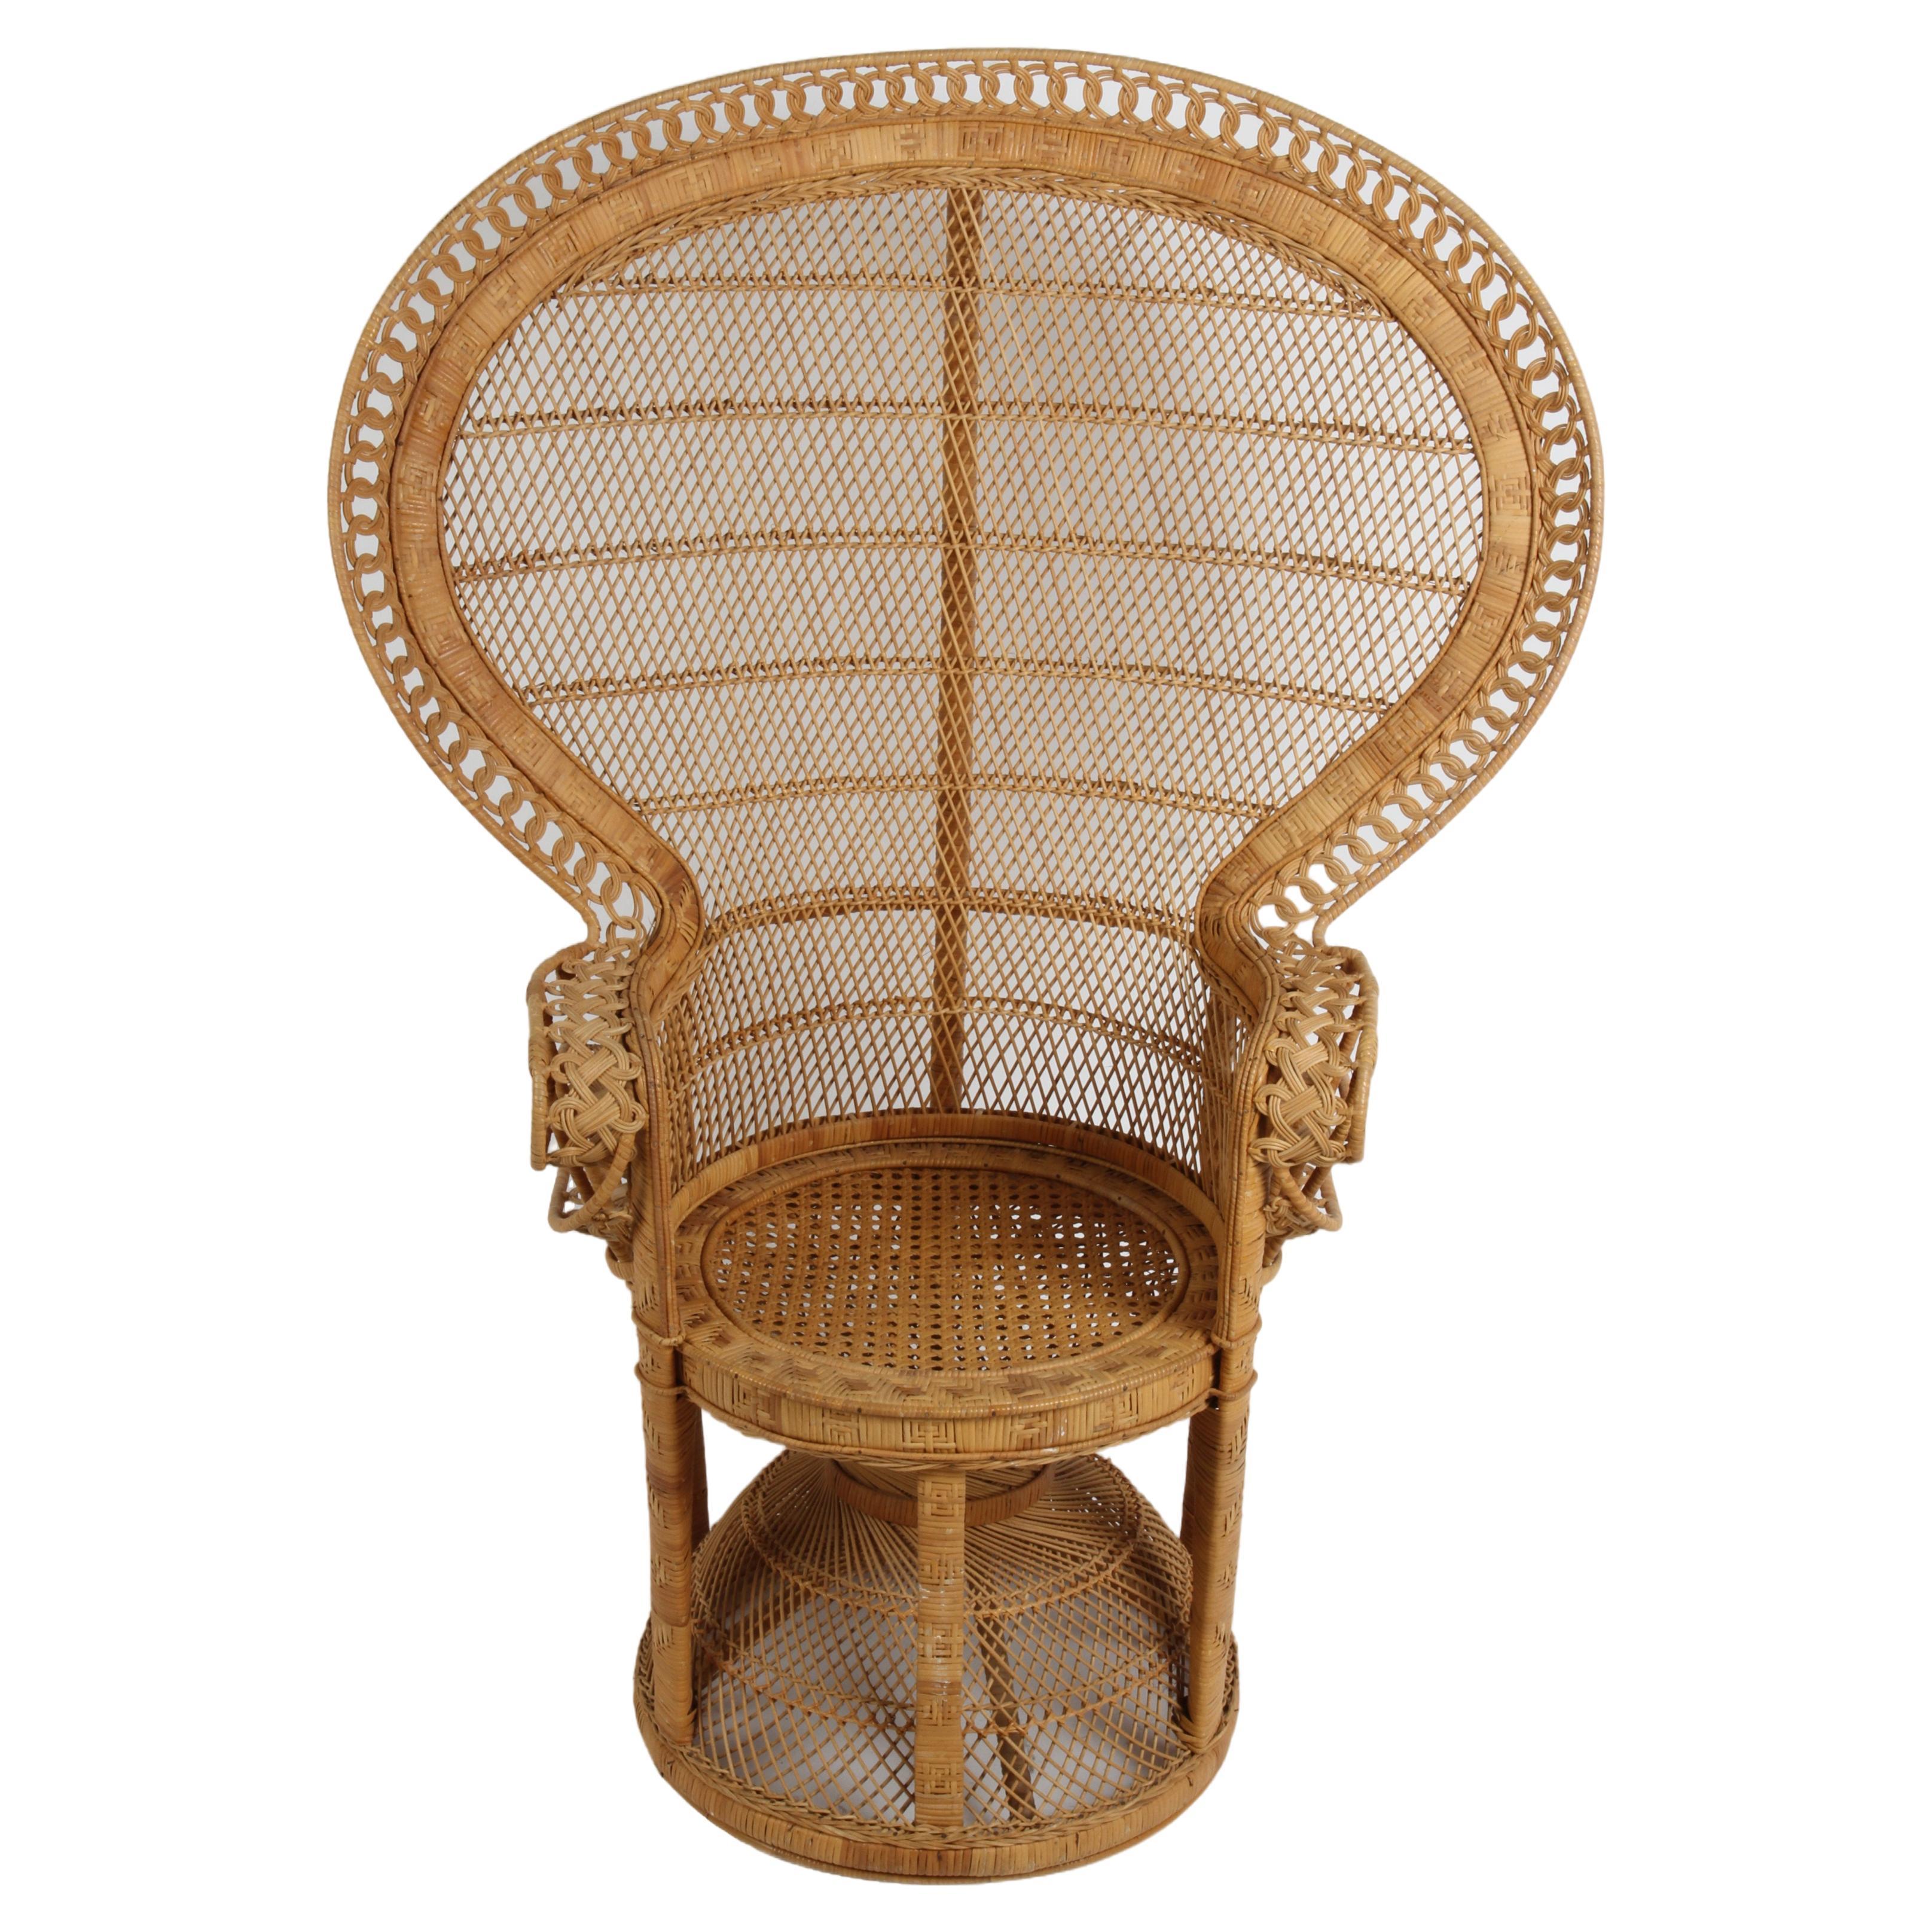 Vintage 1970s Rattan & Wicker Handcrafted Boho Chic Emmanuelle Peacock Chair For Sale